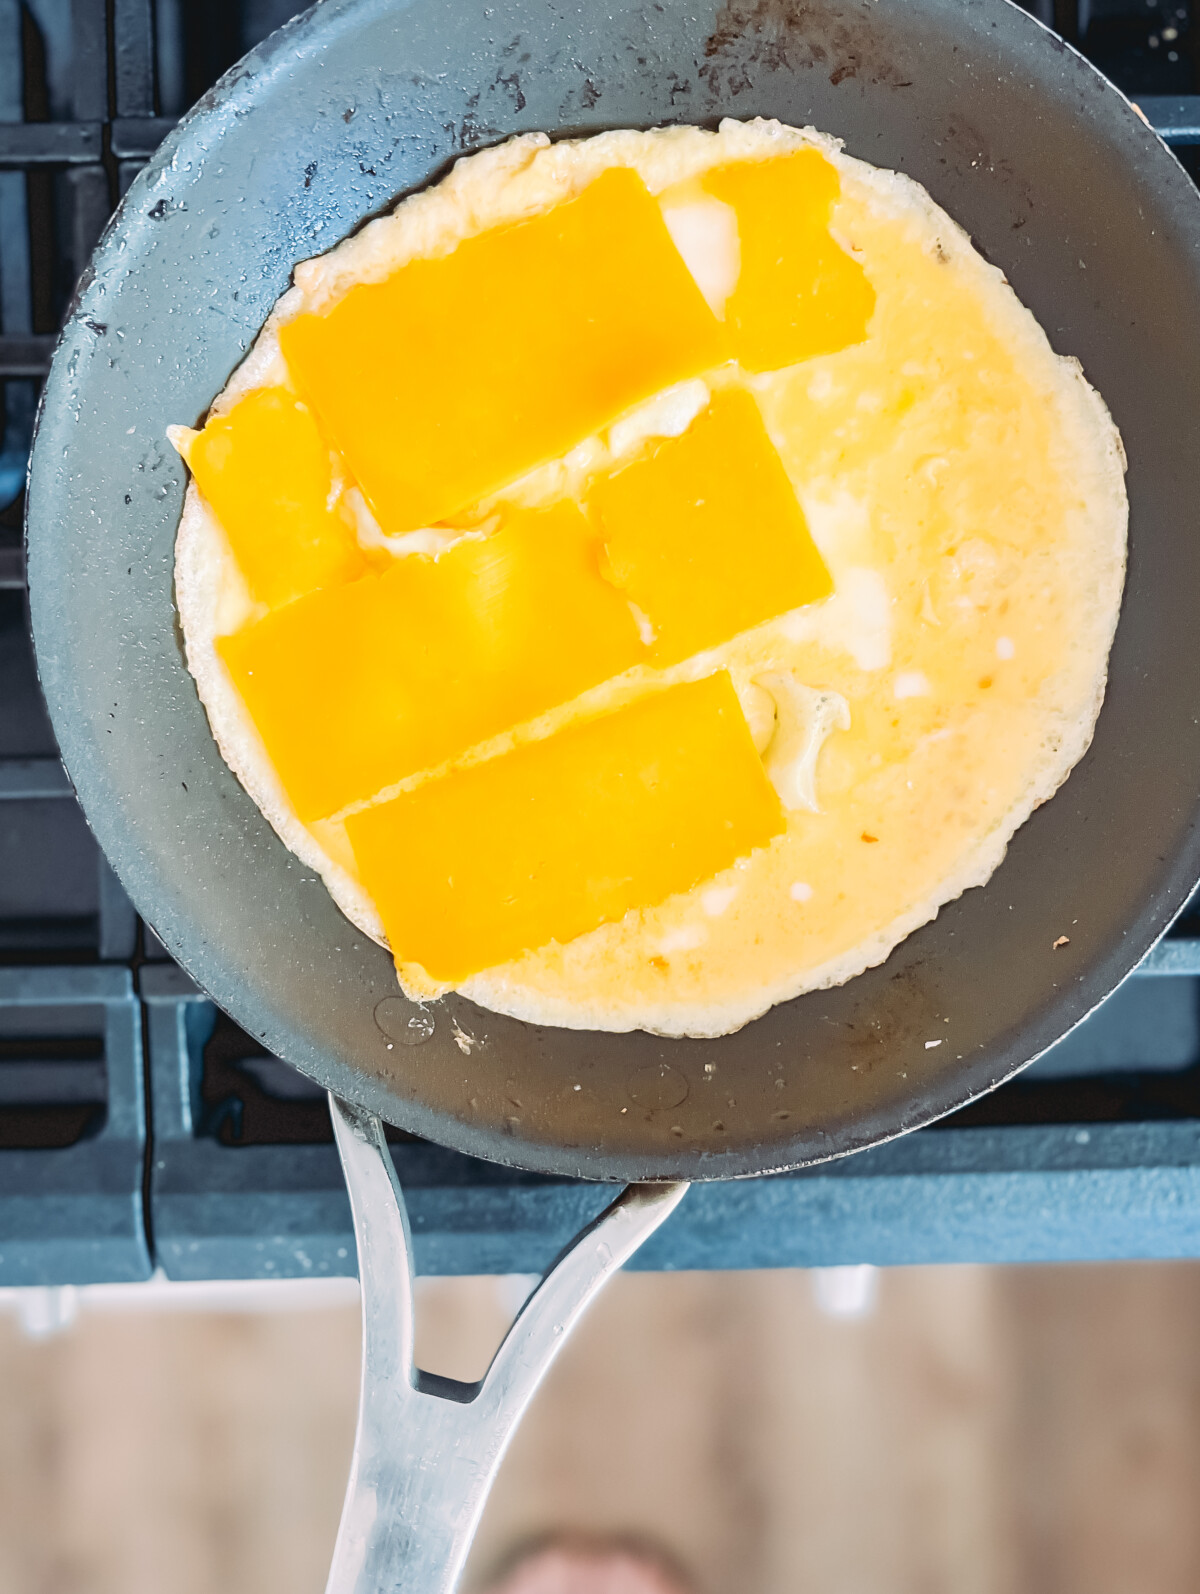 Cheese being laid over eggs in a skillet to make an omelet.